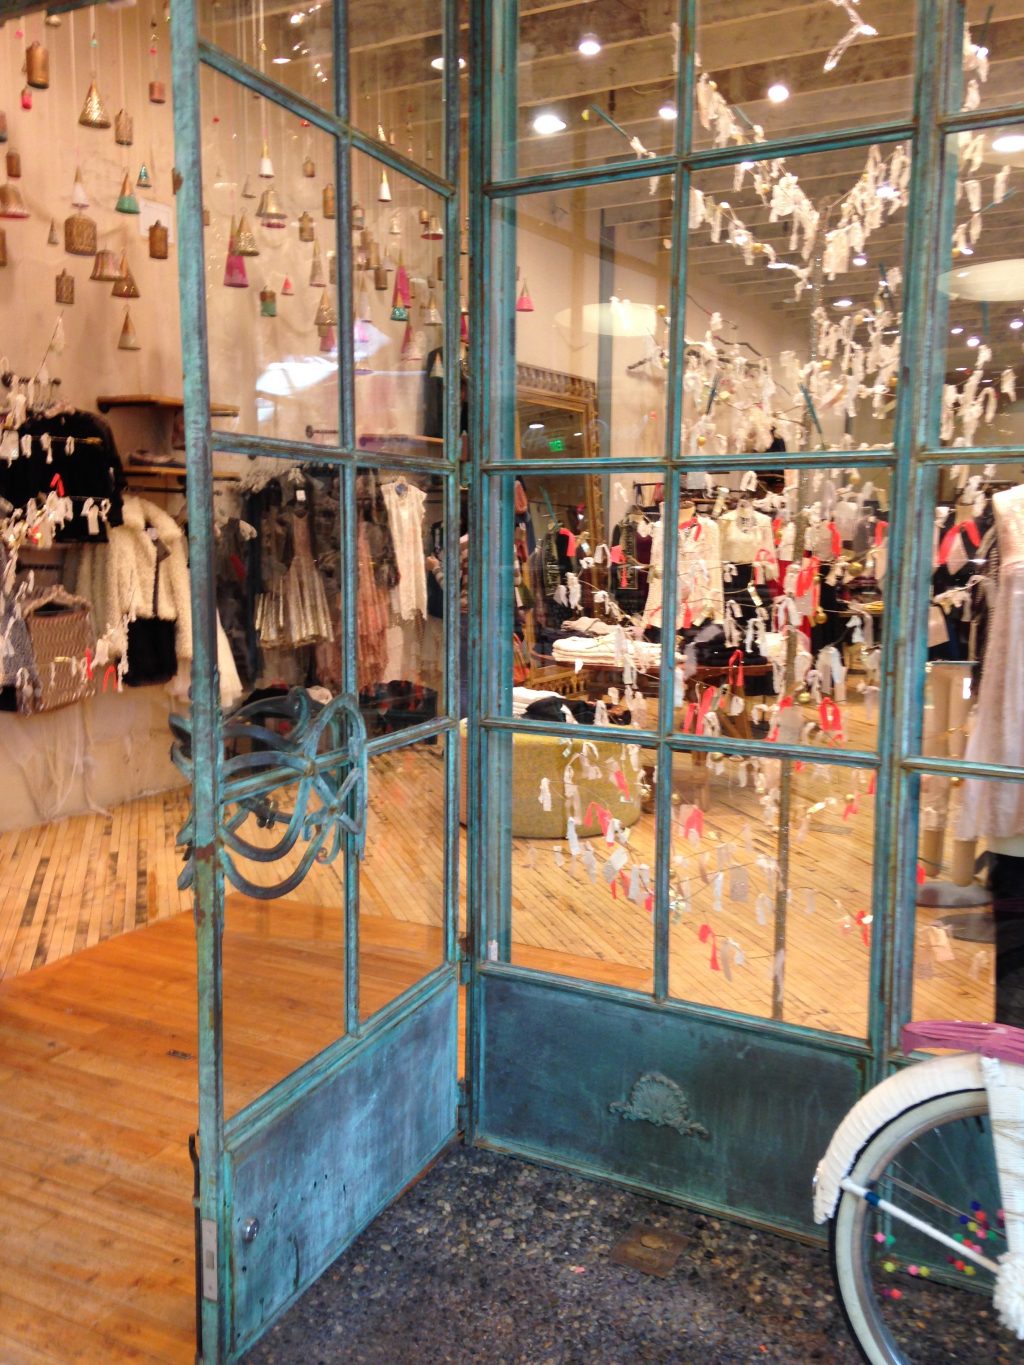 free people store - Google Search  Free people store, Retail inspiration,  Store decor